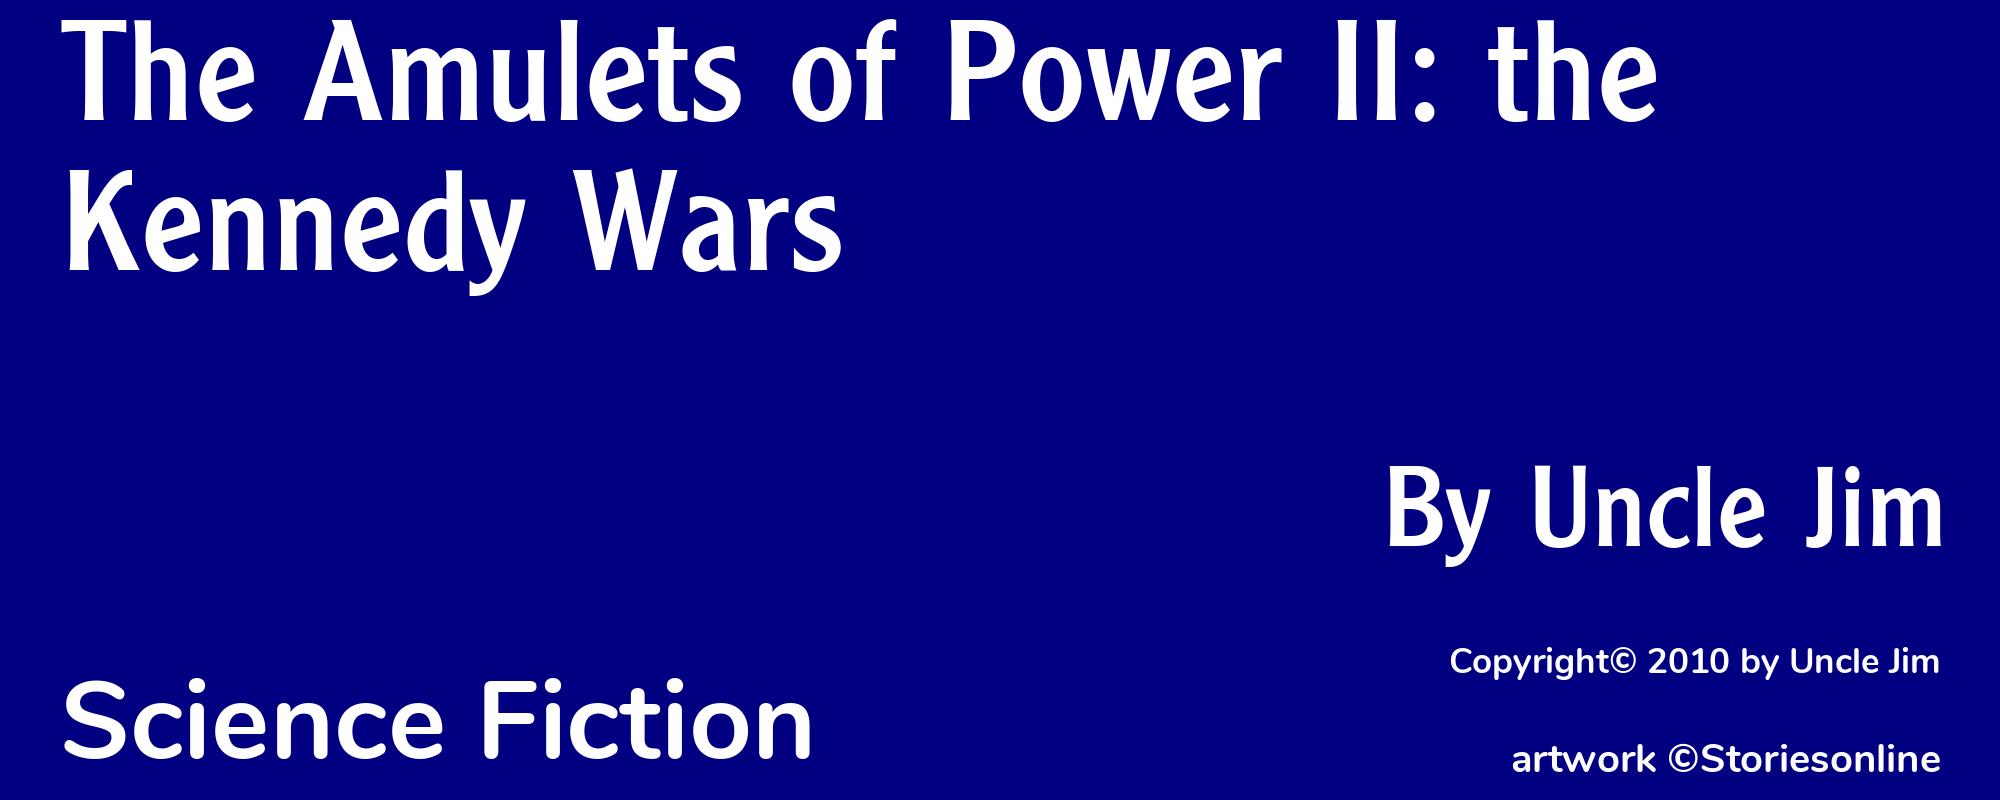 The Amulets of Power II: the Kennedy Wars - Cover